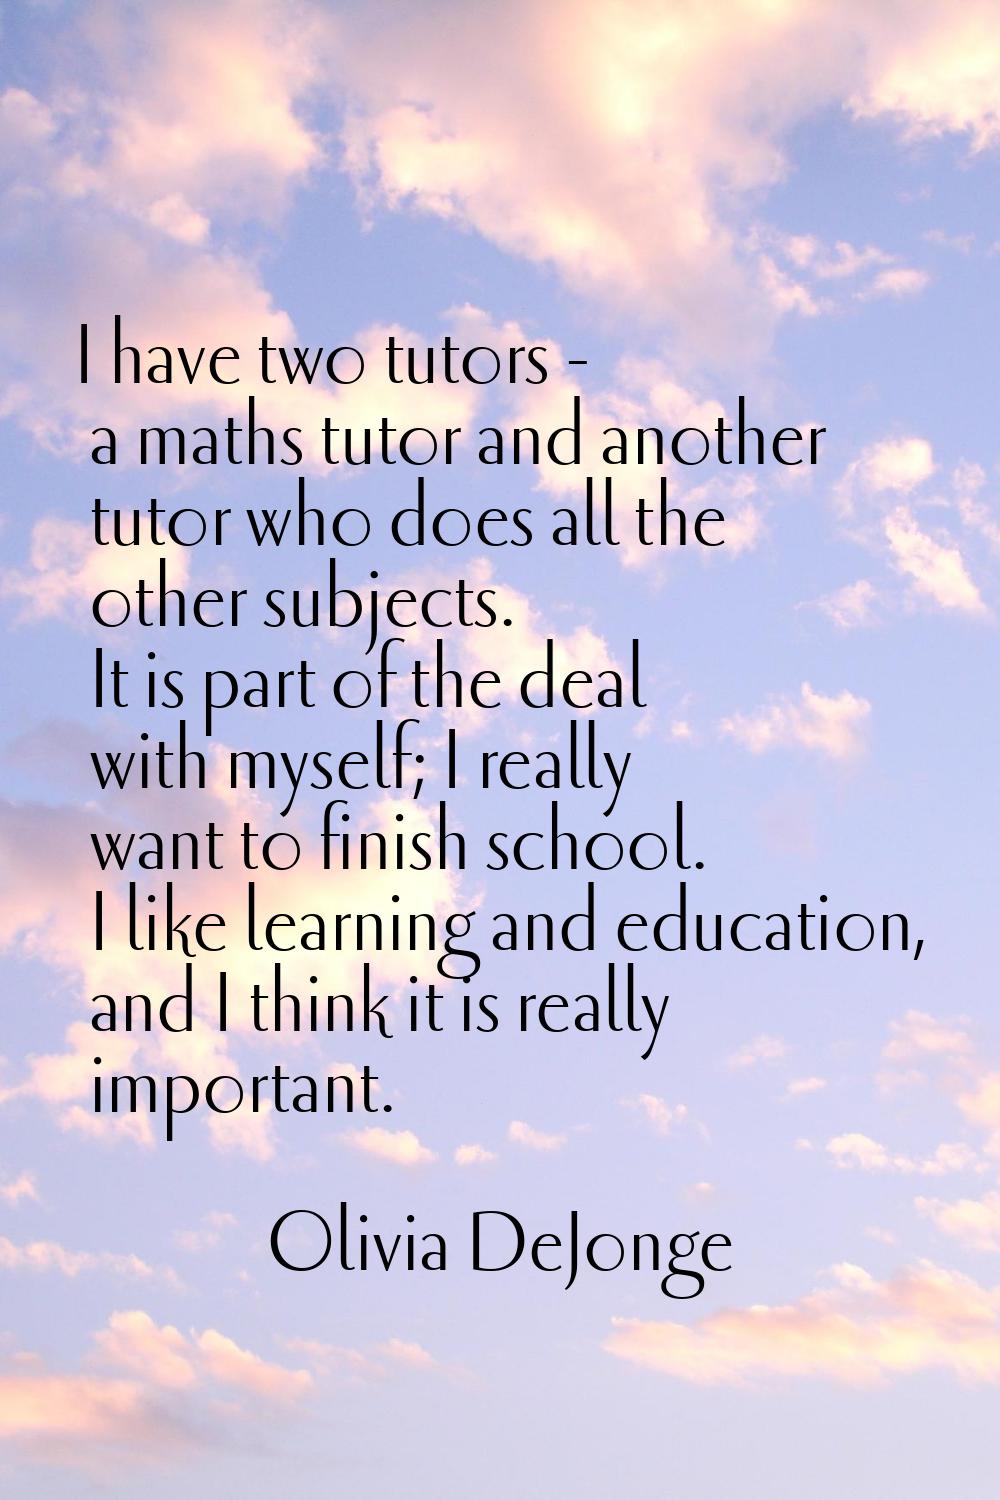 I have two tutors - a maths tutor and another tutor who does all the other subjects. It is part of 